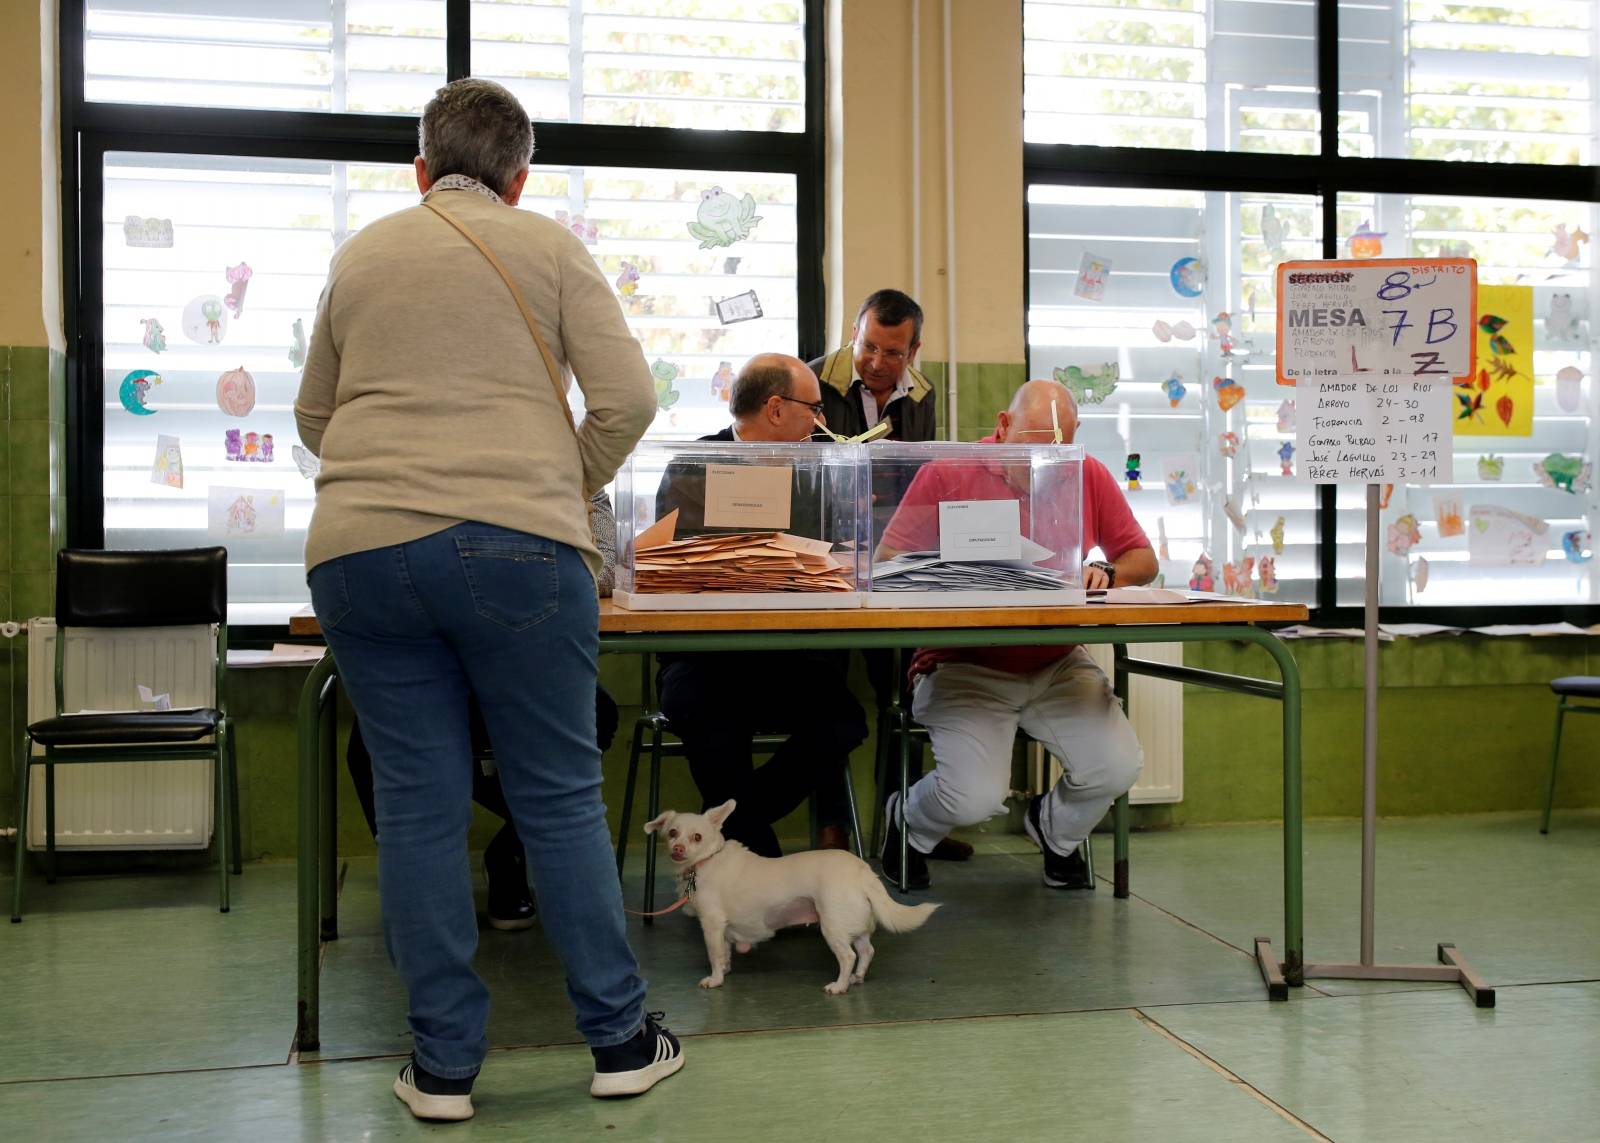 Woman votes during general election in Seville